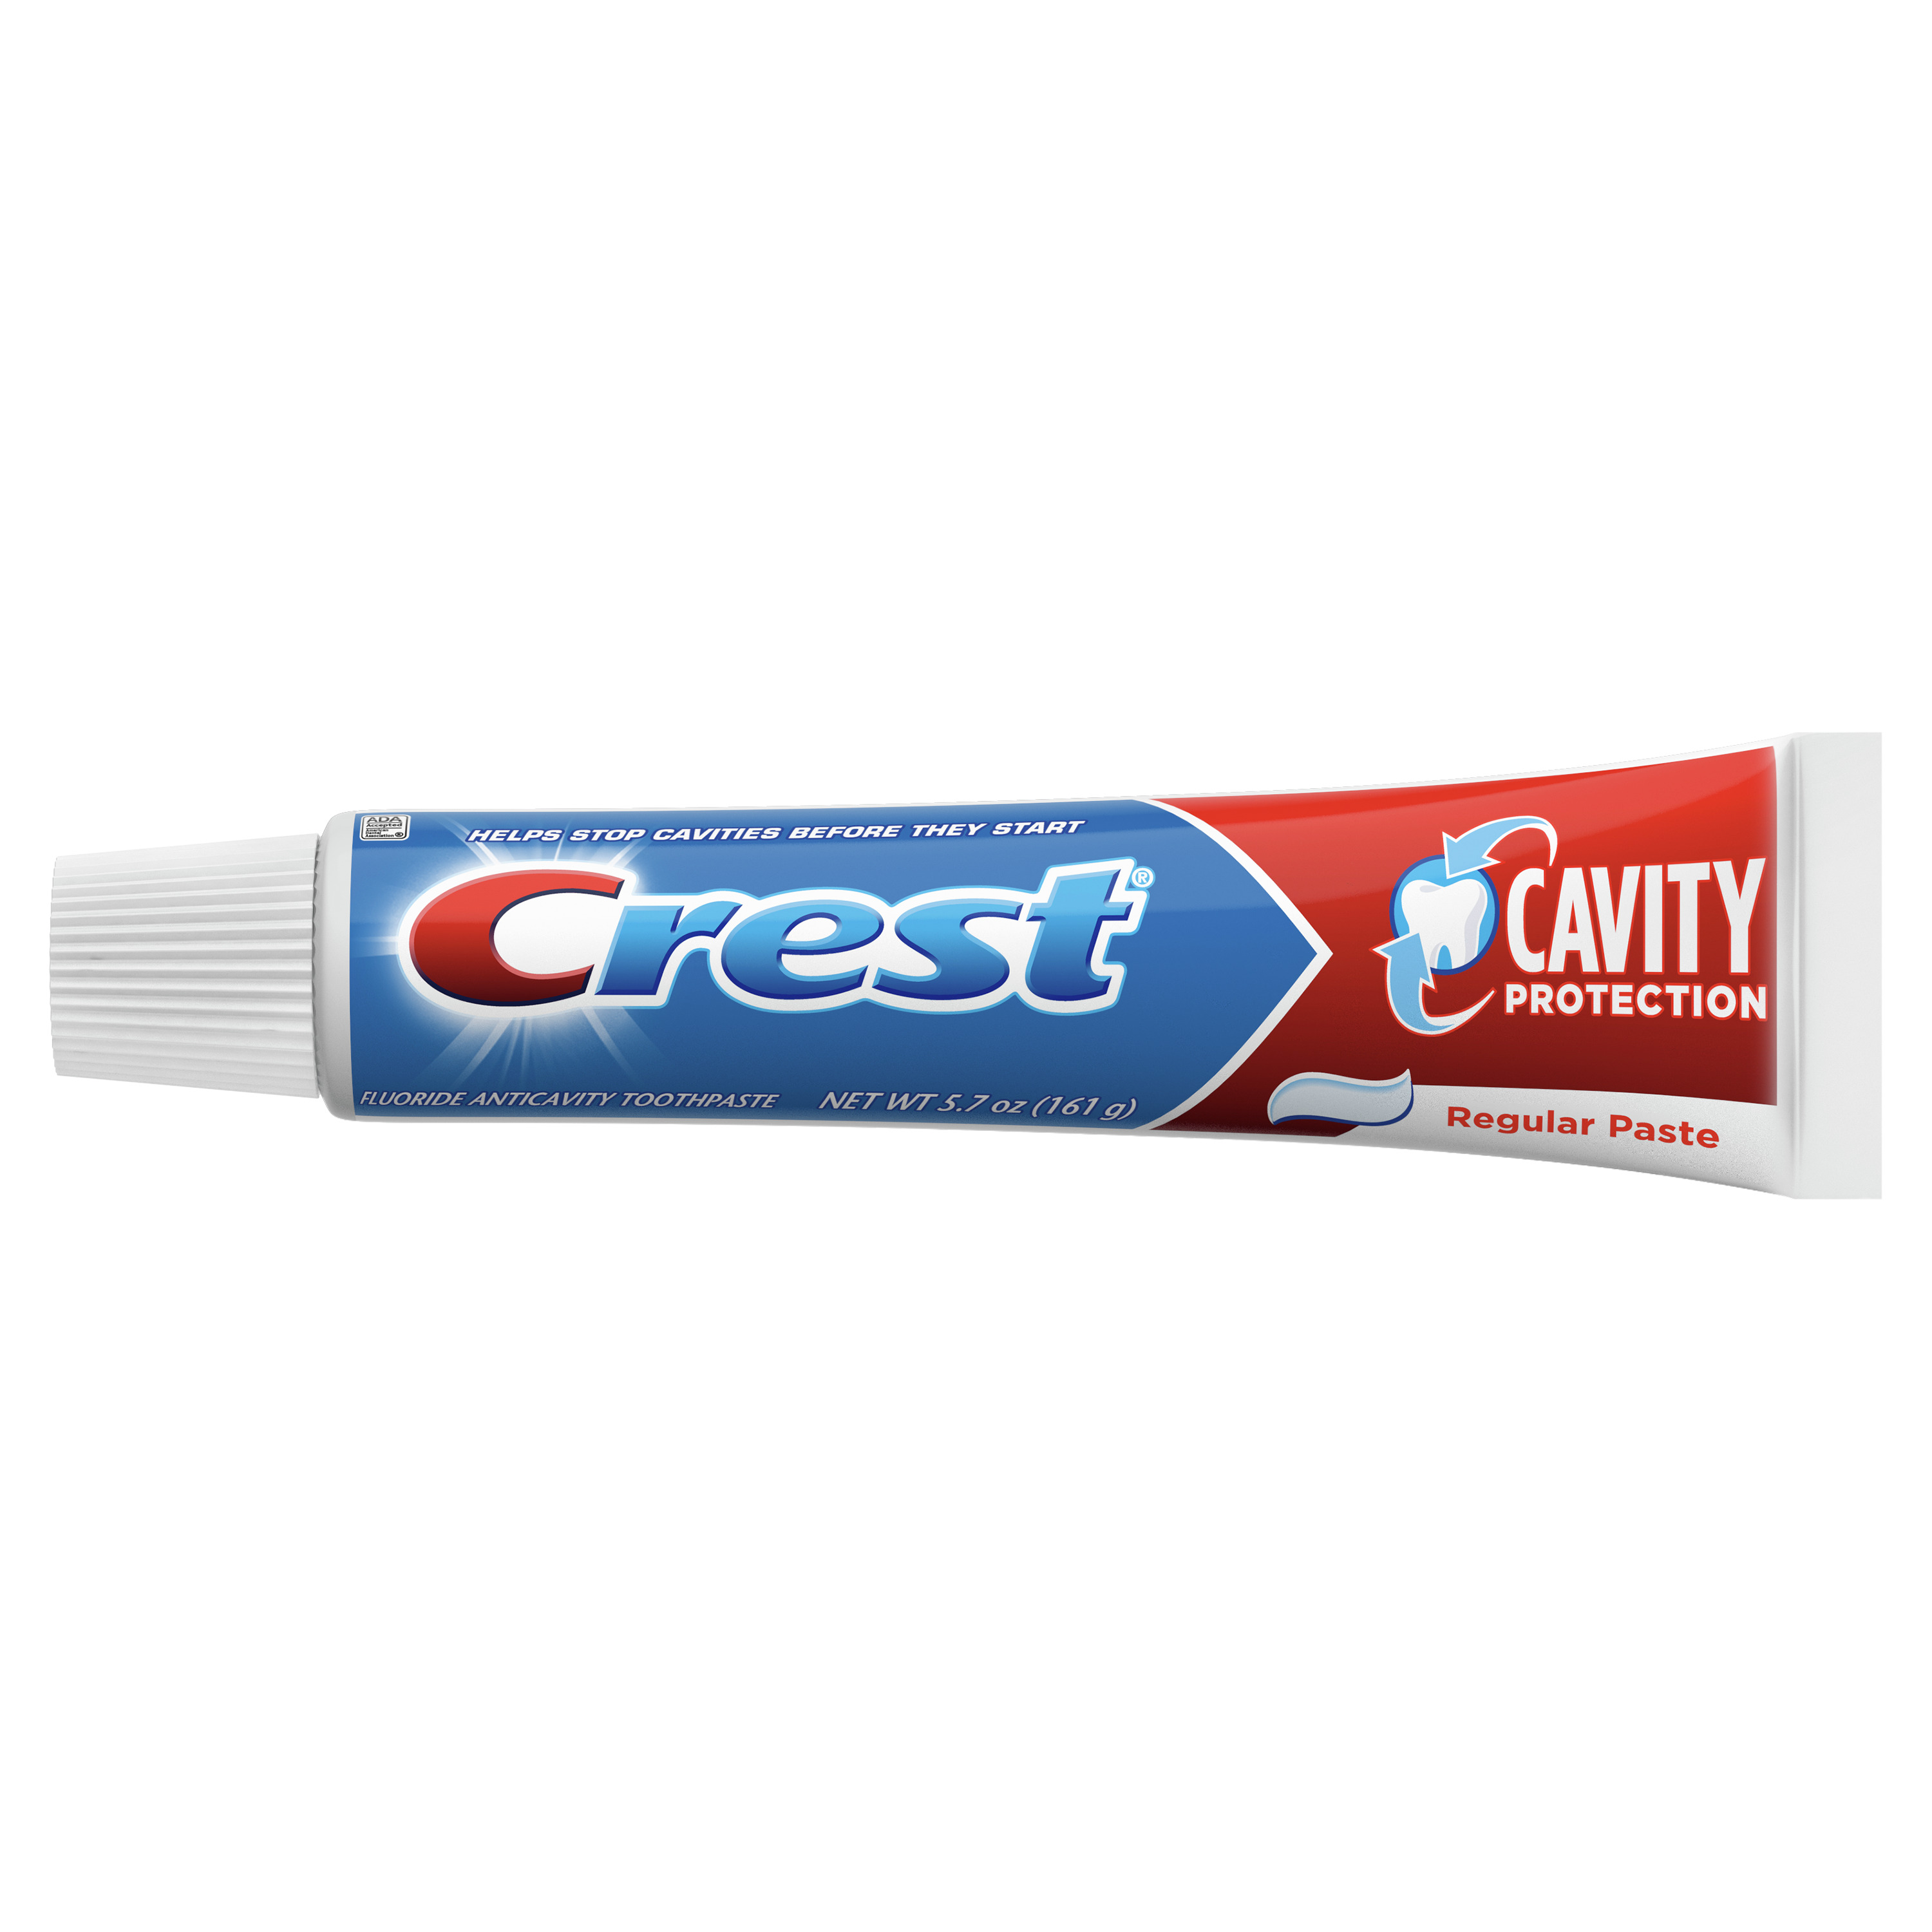 Crest Cavity Protection Toothpaste, Regular Paste, 5.7 oz, 3 Pack - image 3 of 7